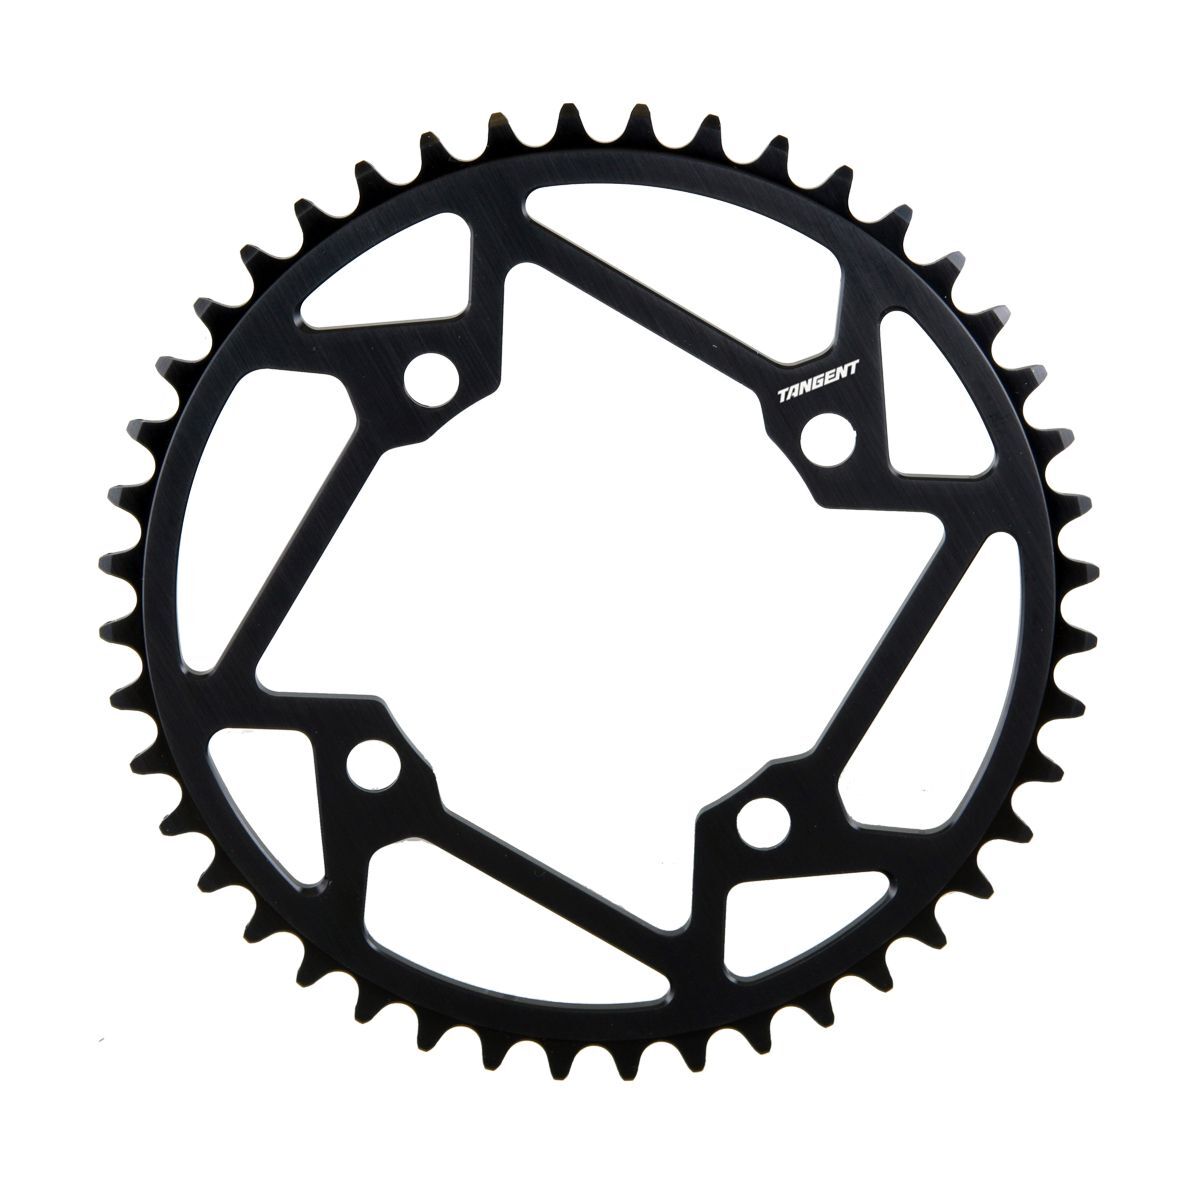 Couronne vélo Tangent Halo 104 mm